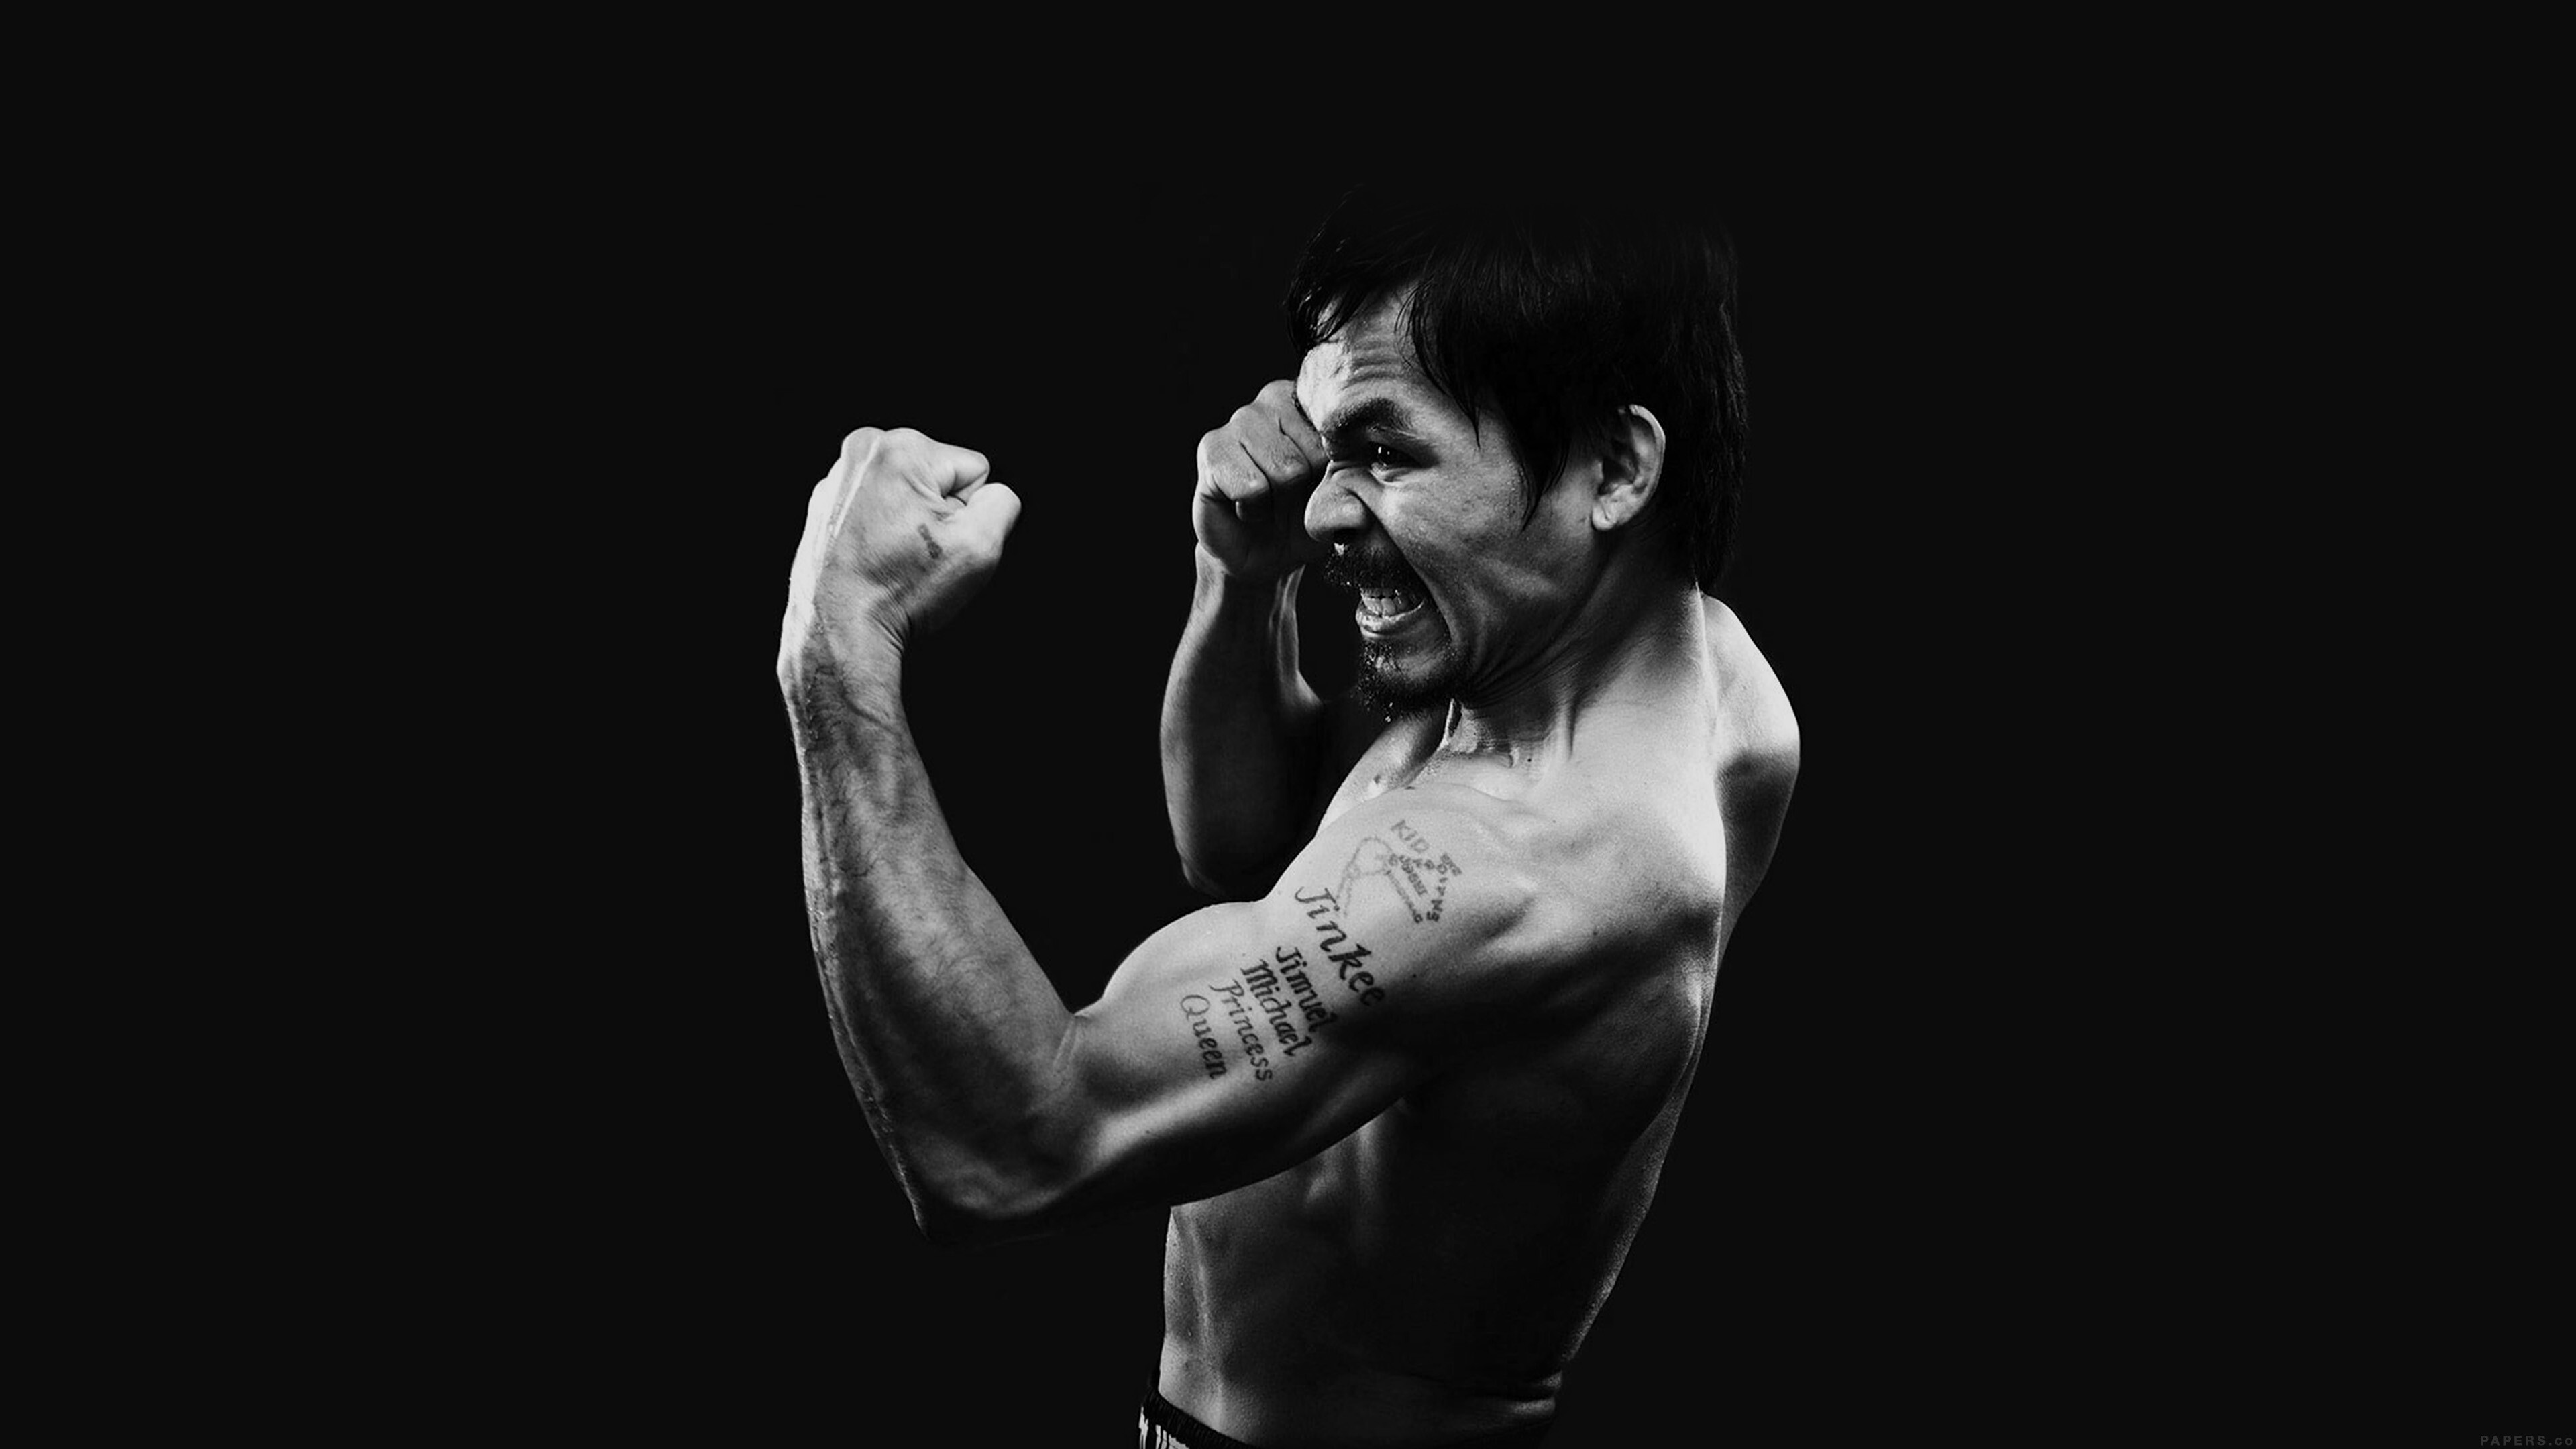 Boxing: Manny Pacquiao, a Filipino former professional fighter who competed from 1995 to 2021. 3840x2160 4K Background.